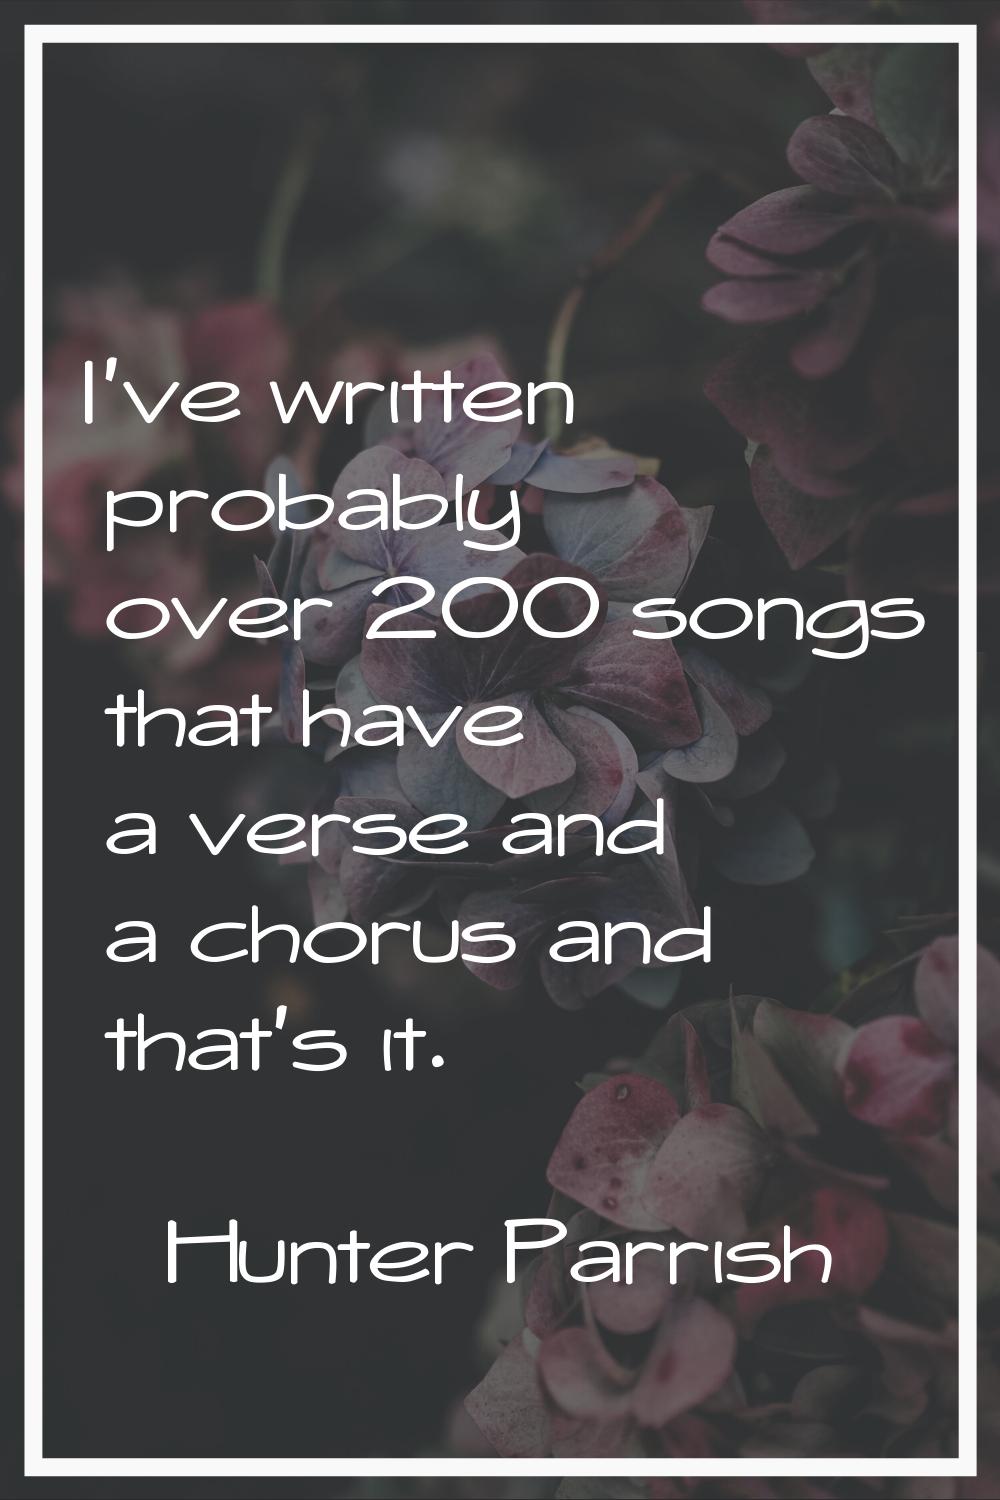 I've written probably over 200 songs that have a verse and a chorus and that's it.